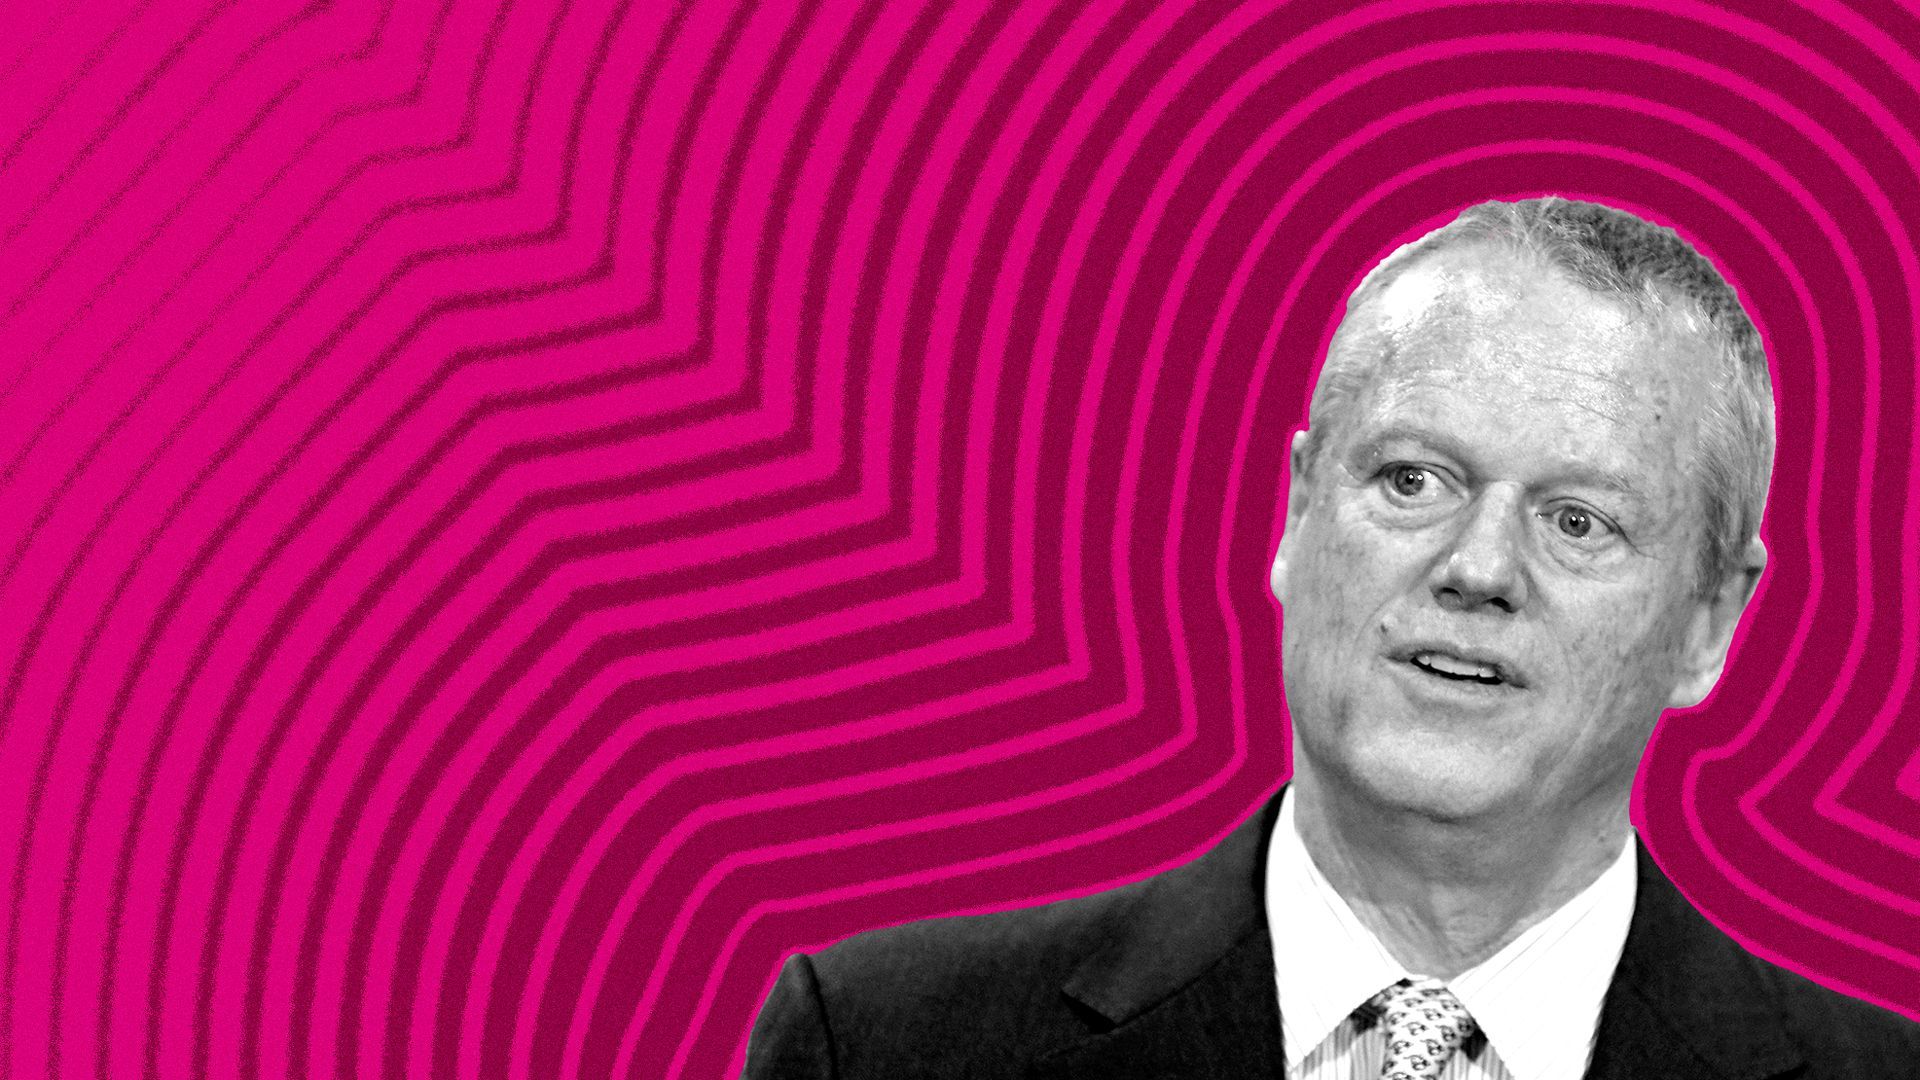 Photo illustration of Massachusetts Governor Charlie Baker with lines radiating from him.